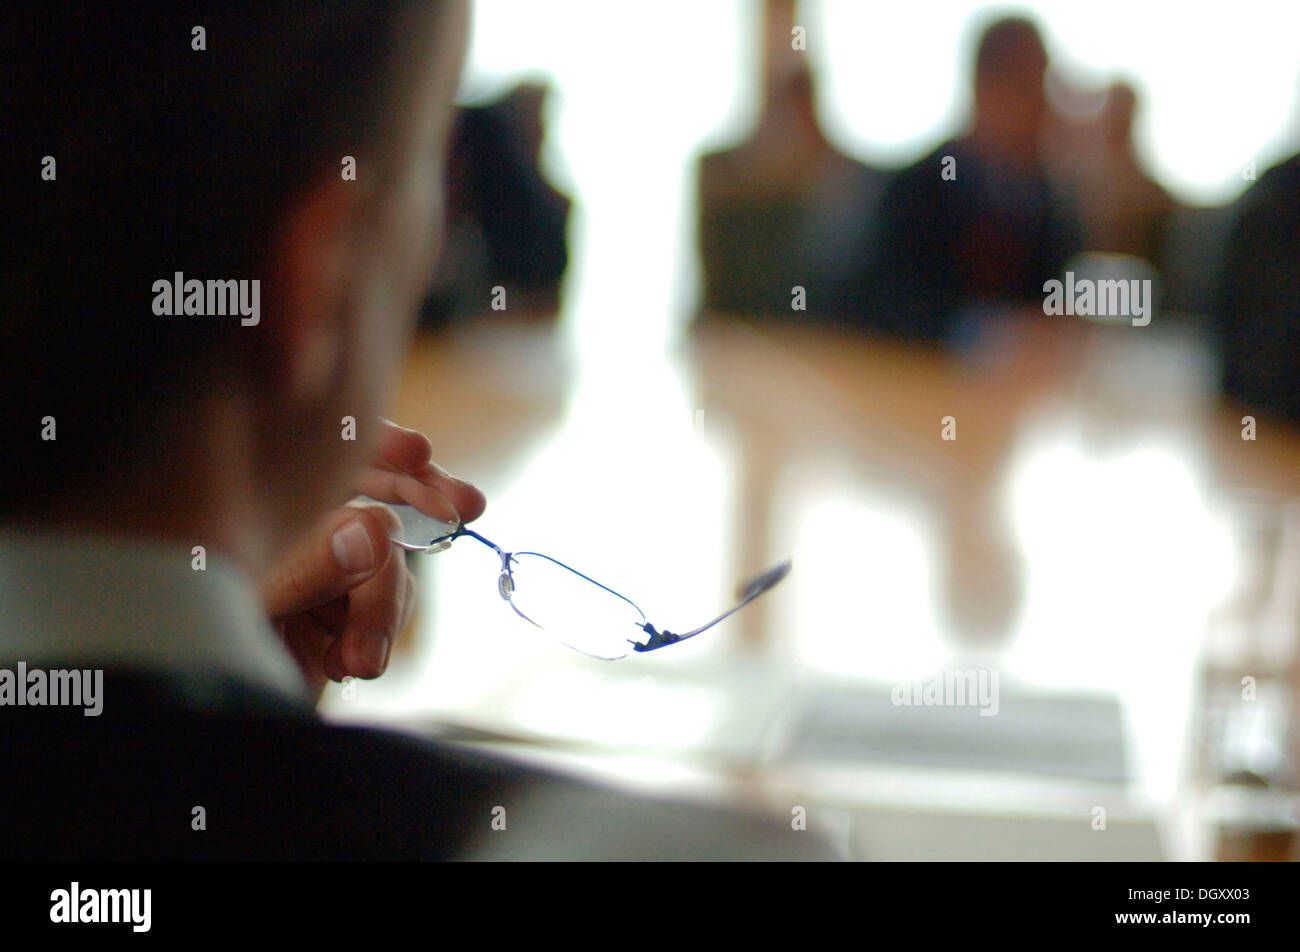 Meeting situation with the focus on glasses and hands, blurred people Stock Photo